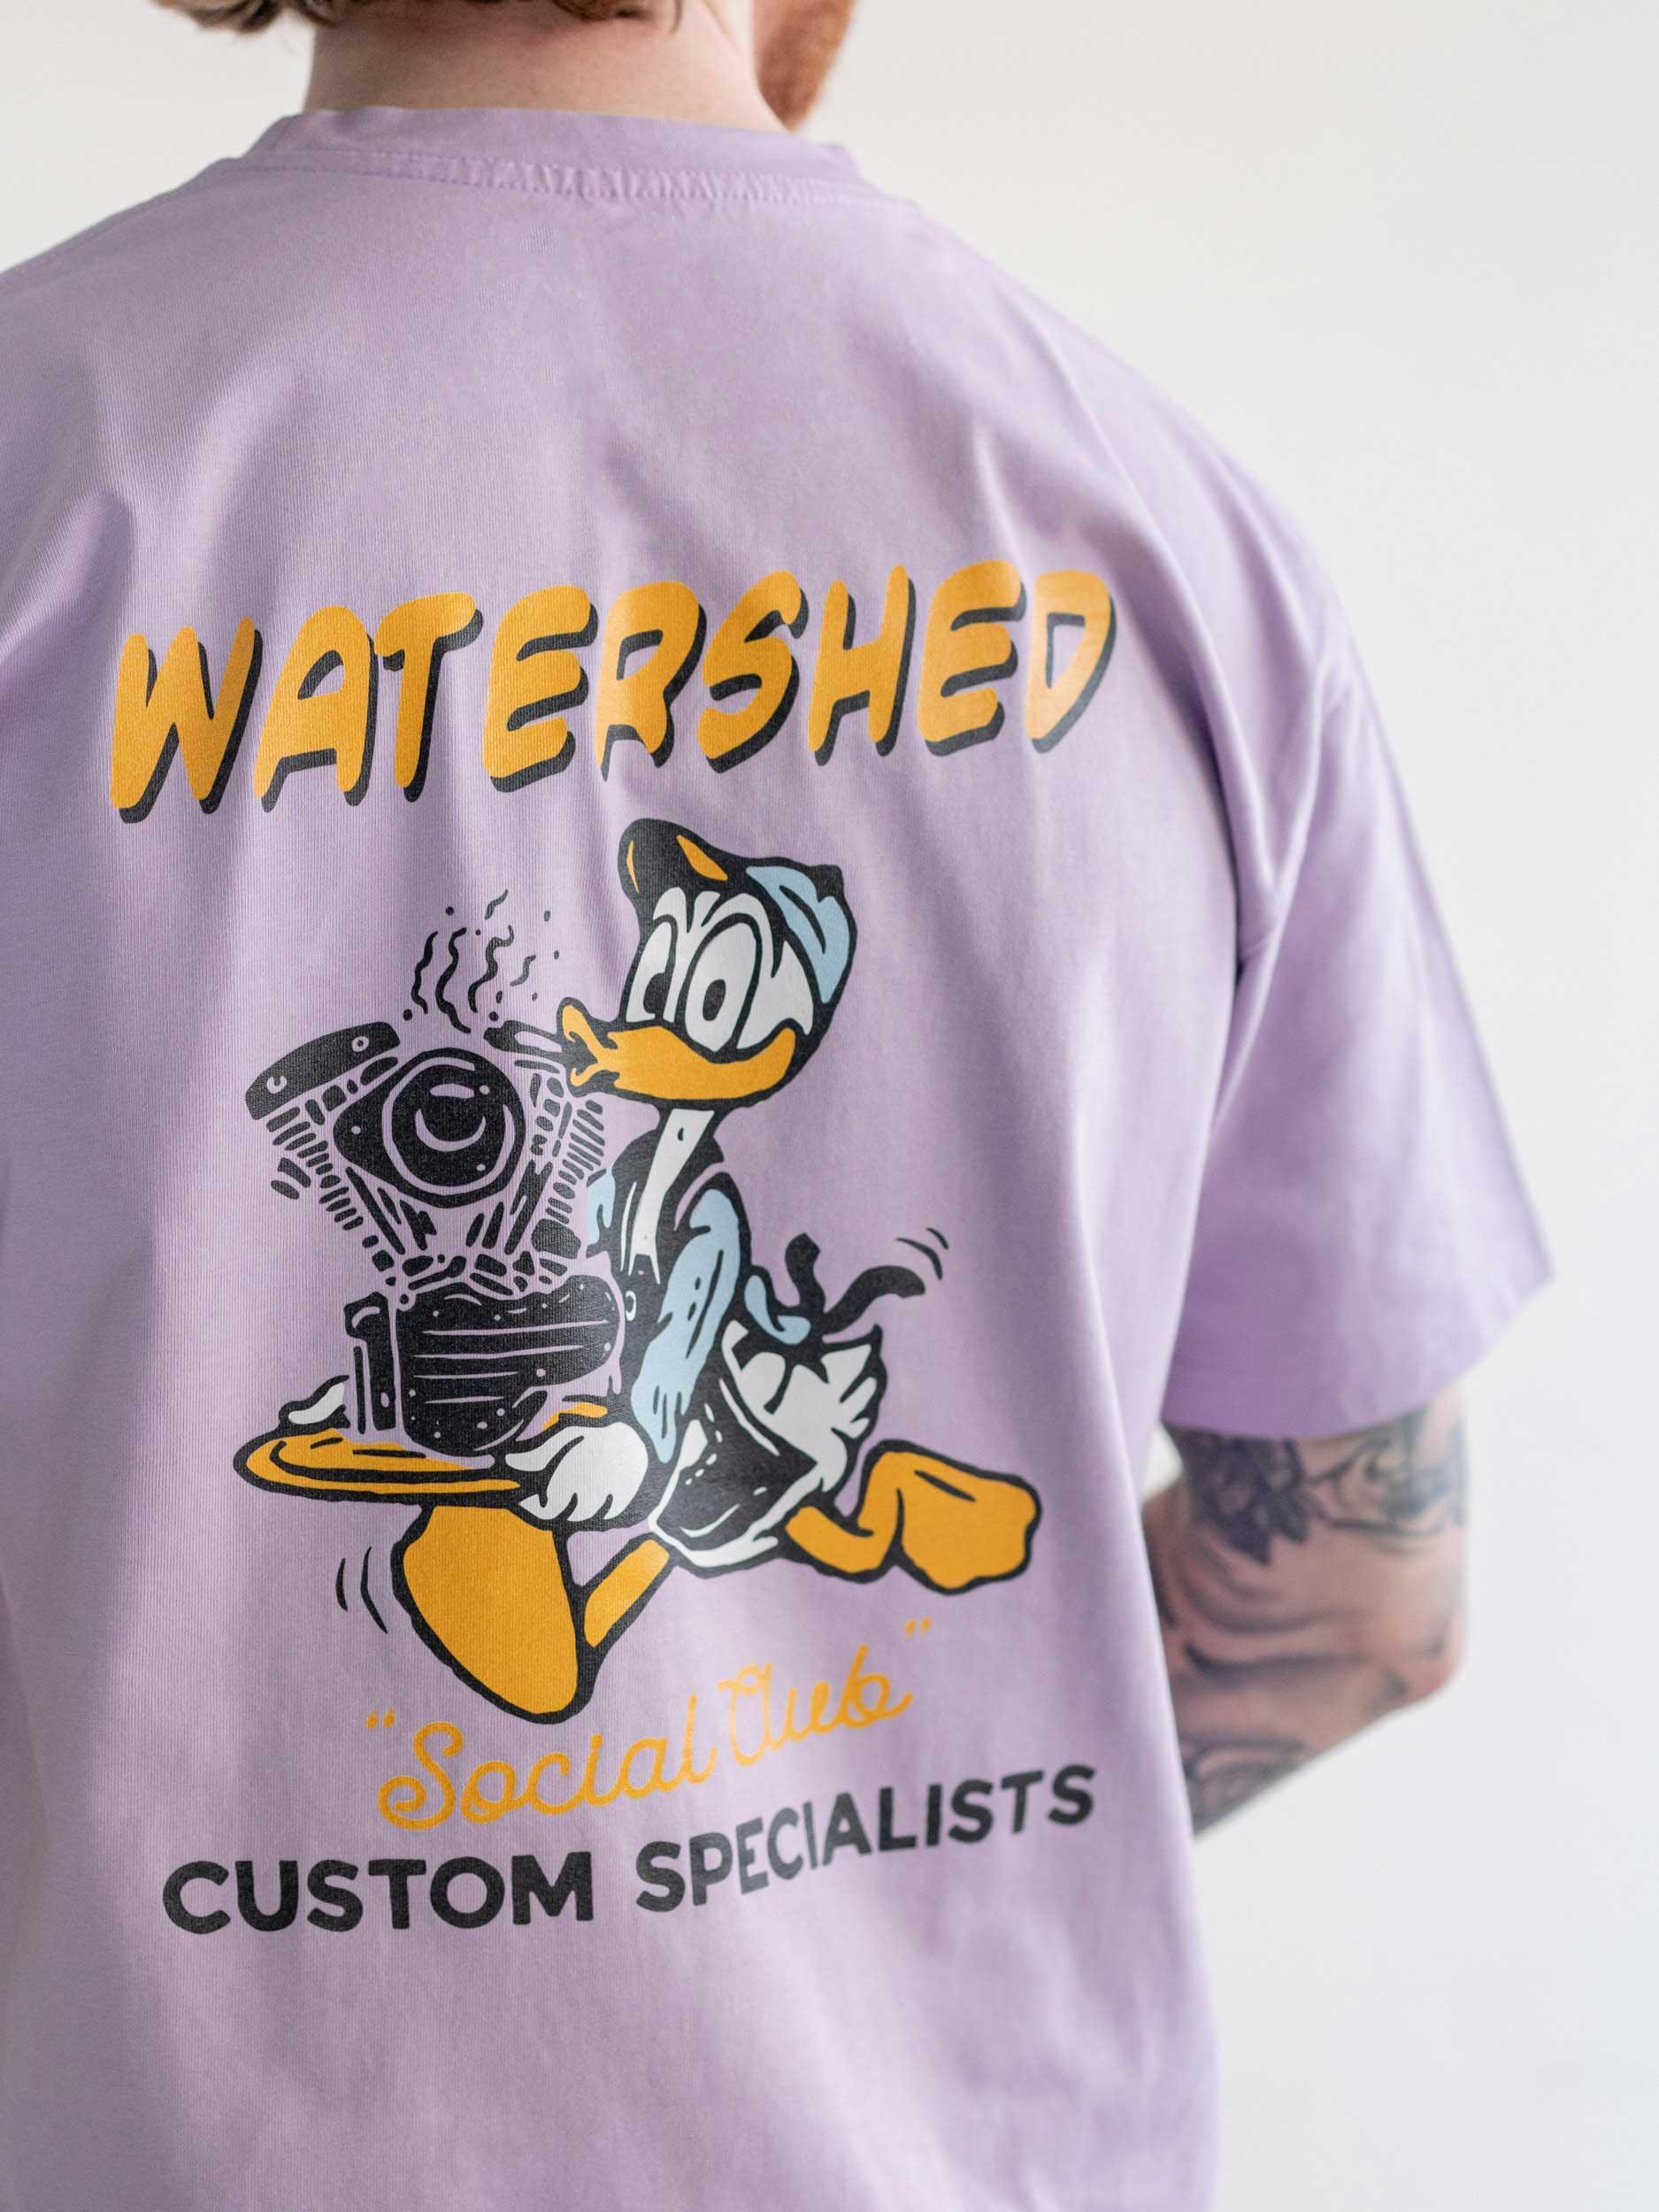 Custom Specialist T-Shirt - Watershed Brand